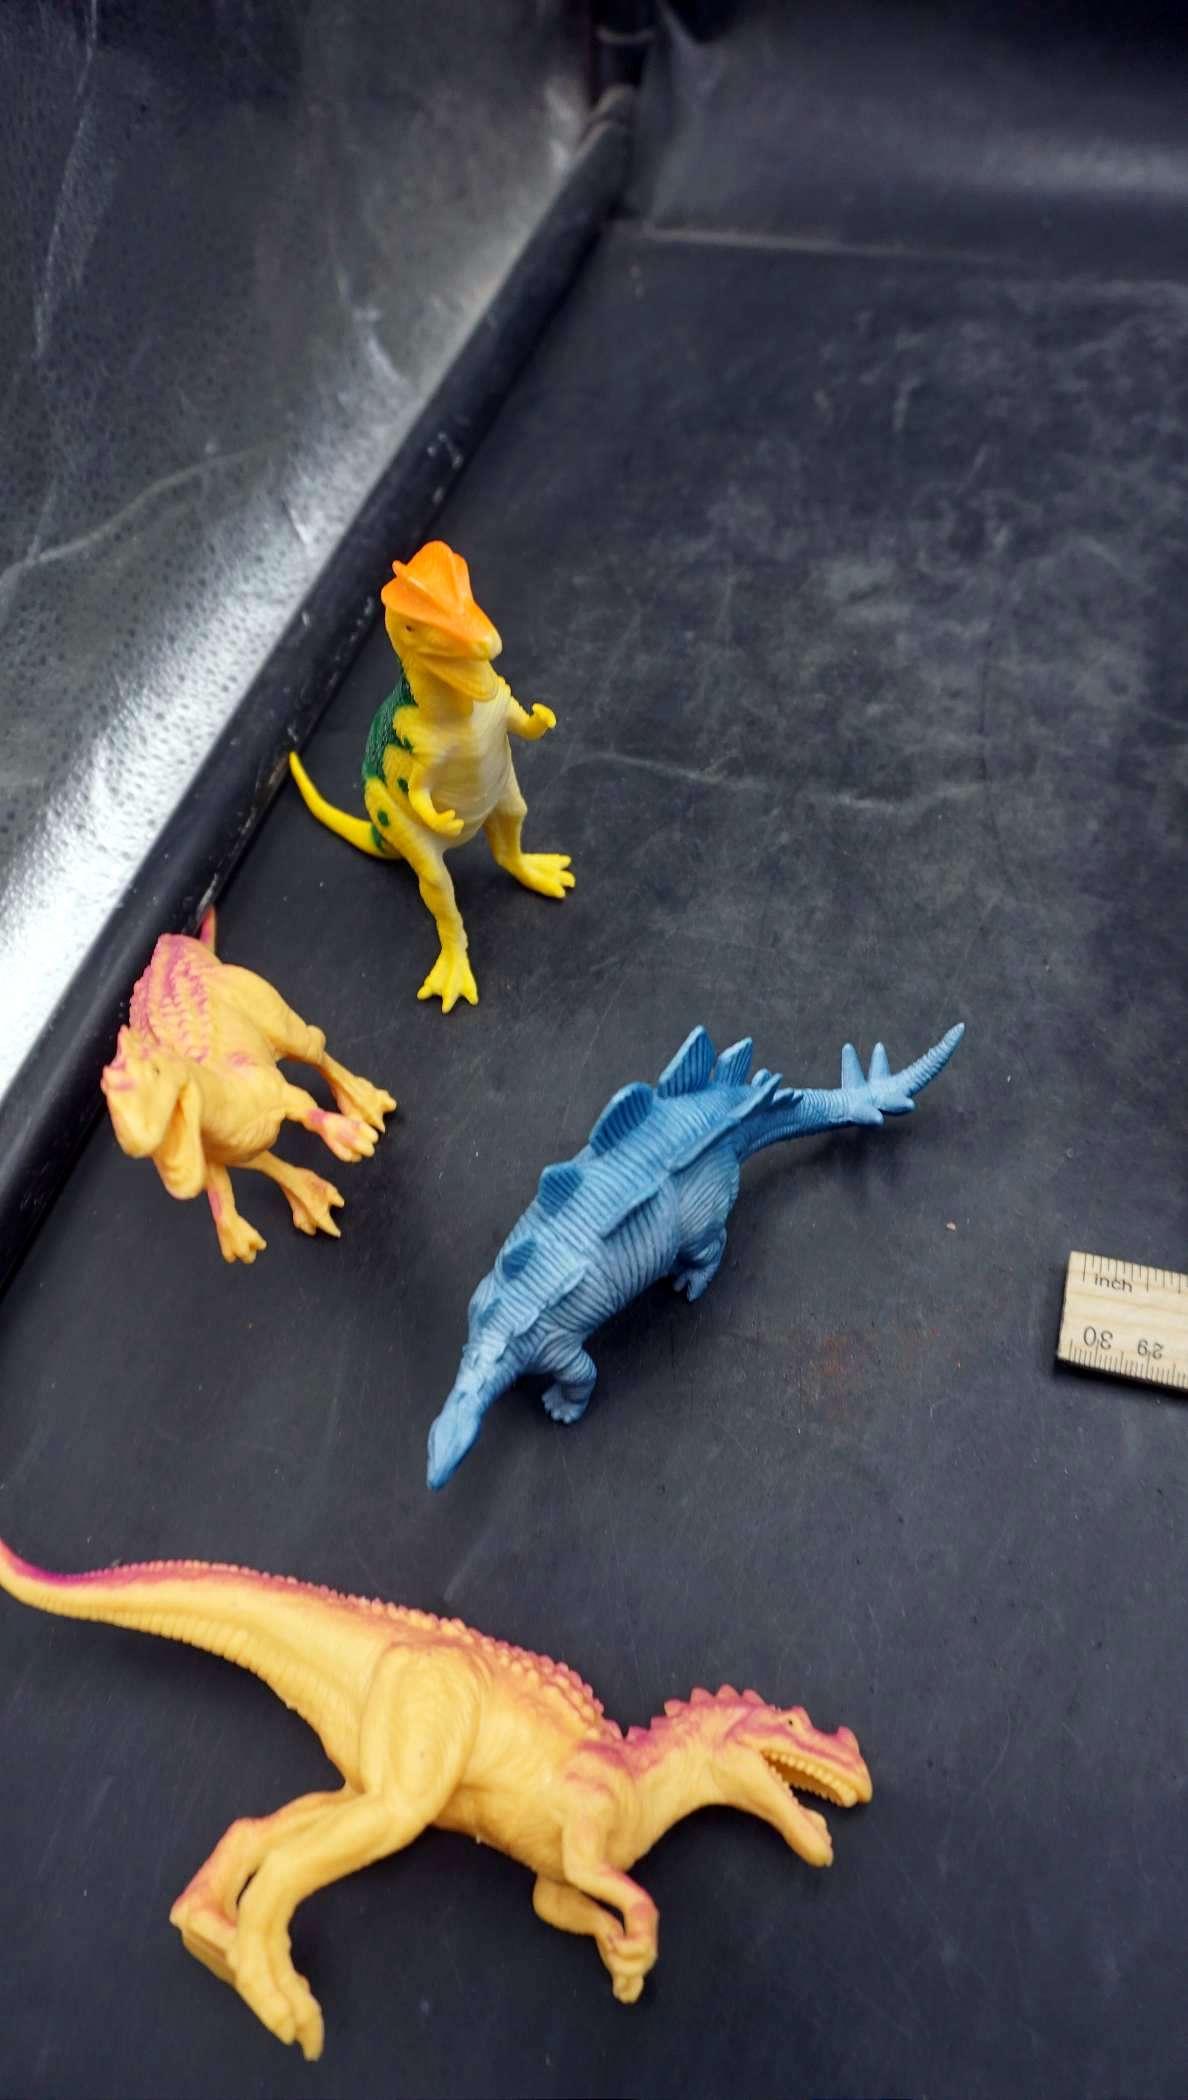 Toy Dinosaurs & Truck